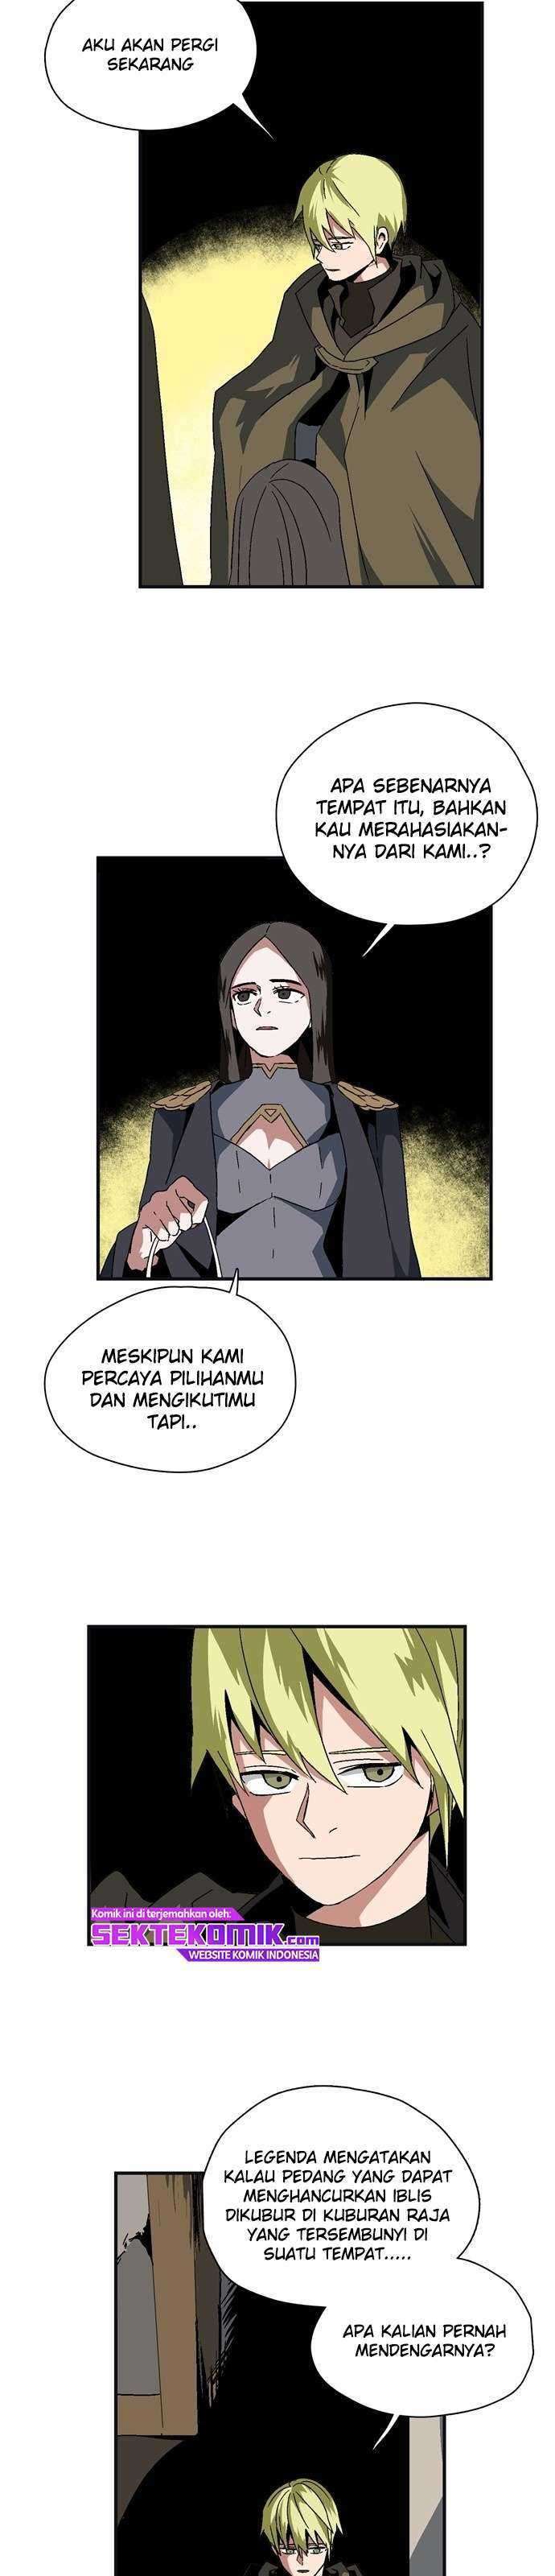 One Step to The Demon King Chapter 01.1